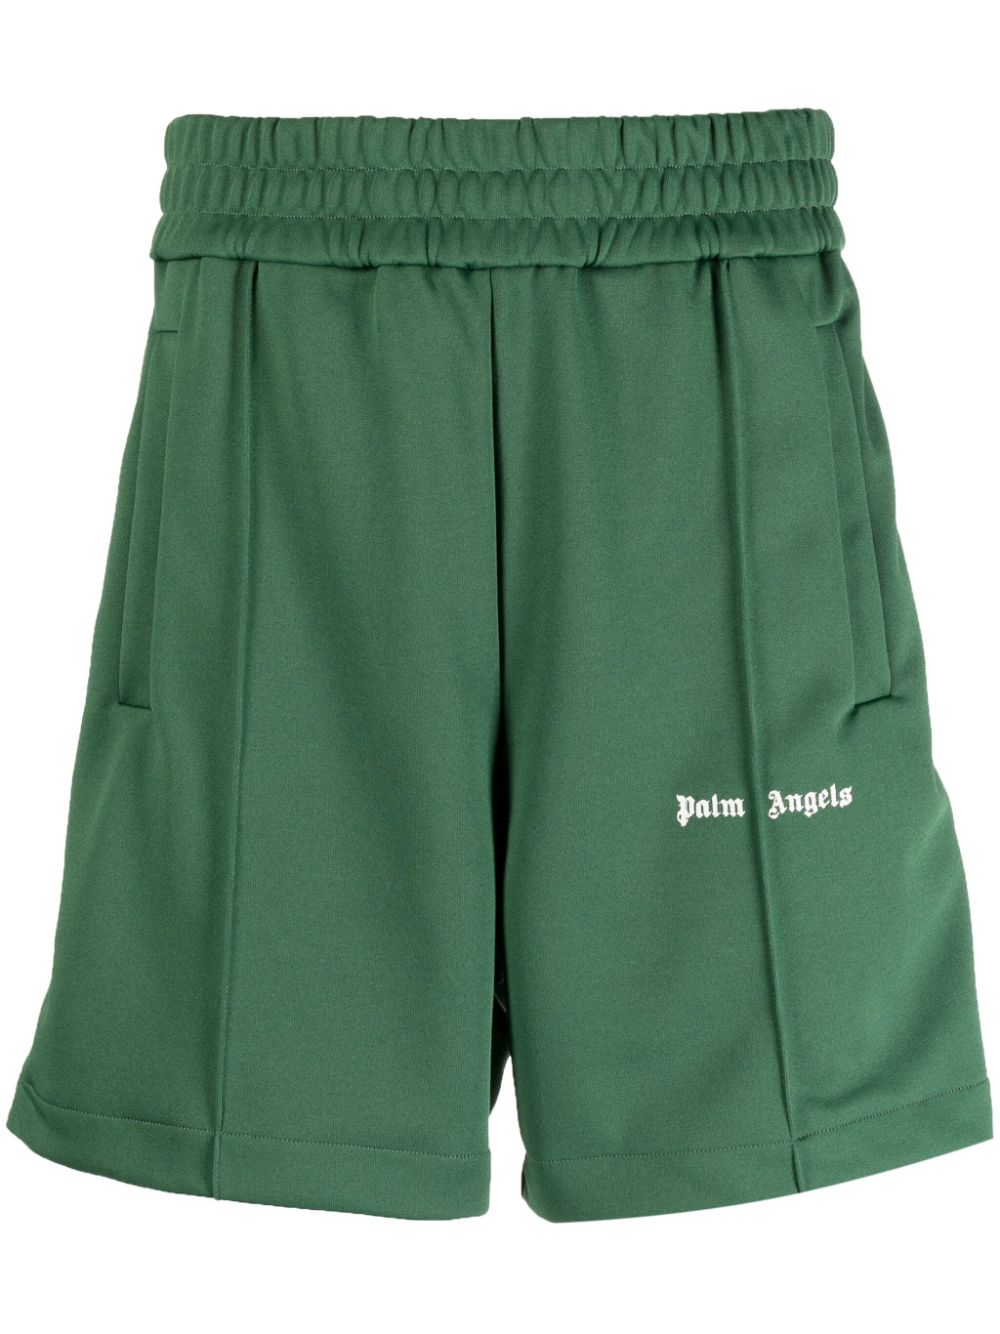 PALM ANGELS NEW CLASSIC EMBROIDERED TRACK SHORTS